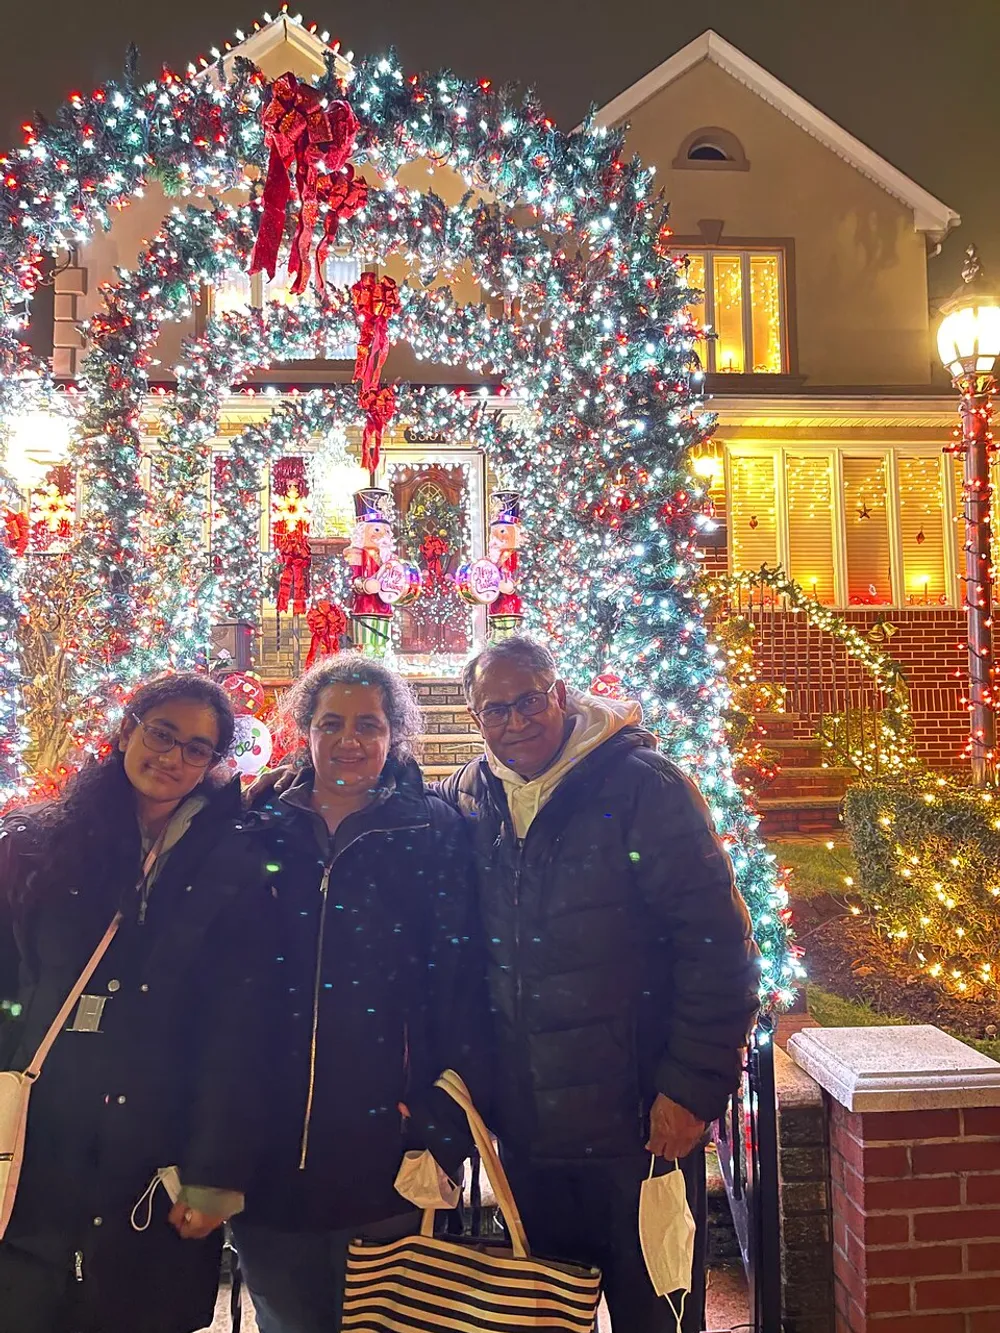 Three people are posing for a photo in front of a festively decorated house with a large illuminated Christmas wreath archway